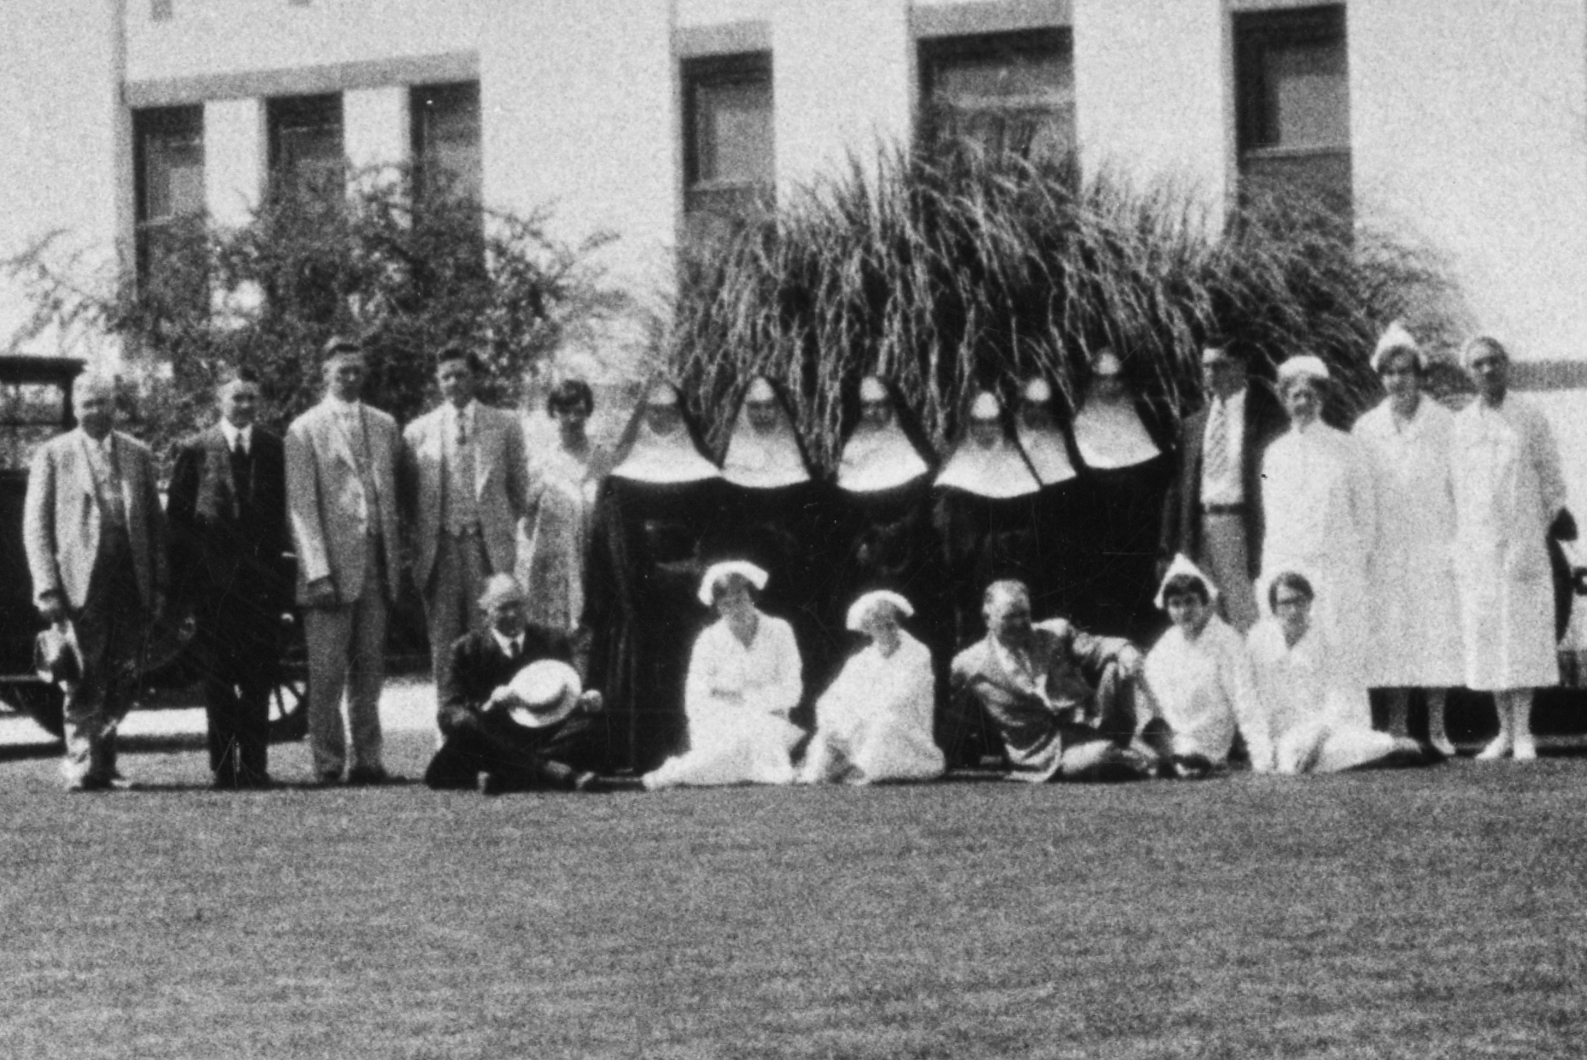 Sisters of Mercy and hospital staff, 1915